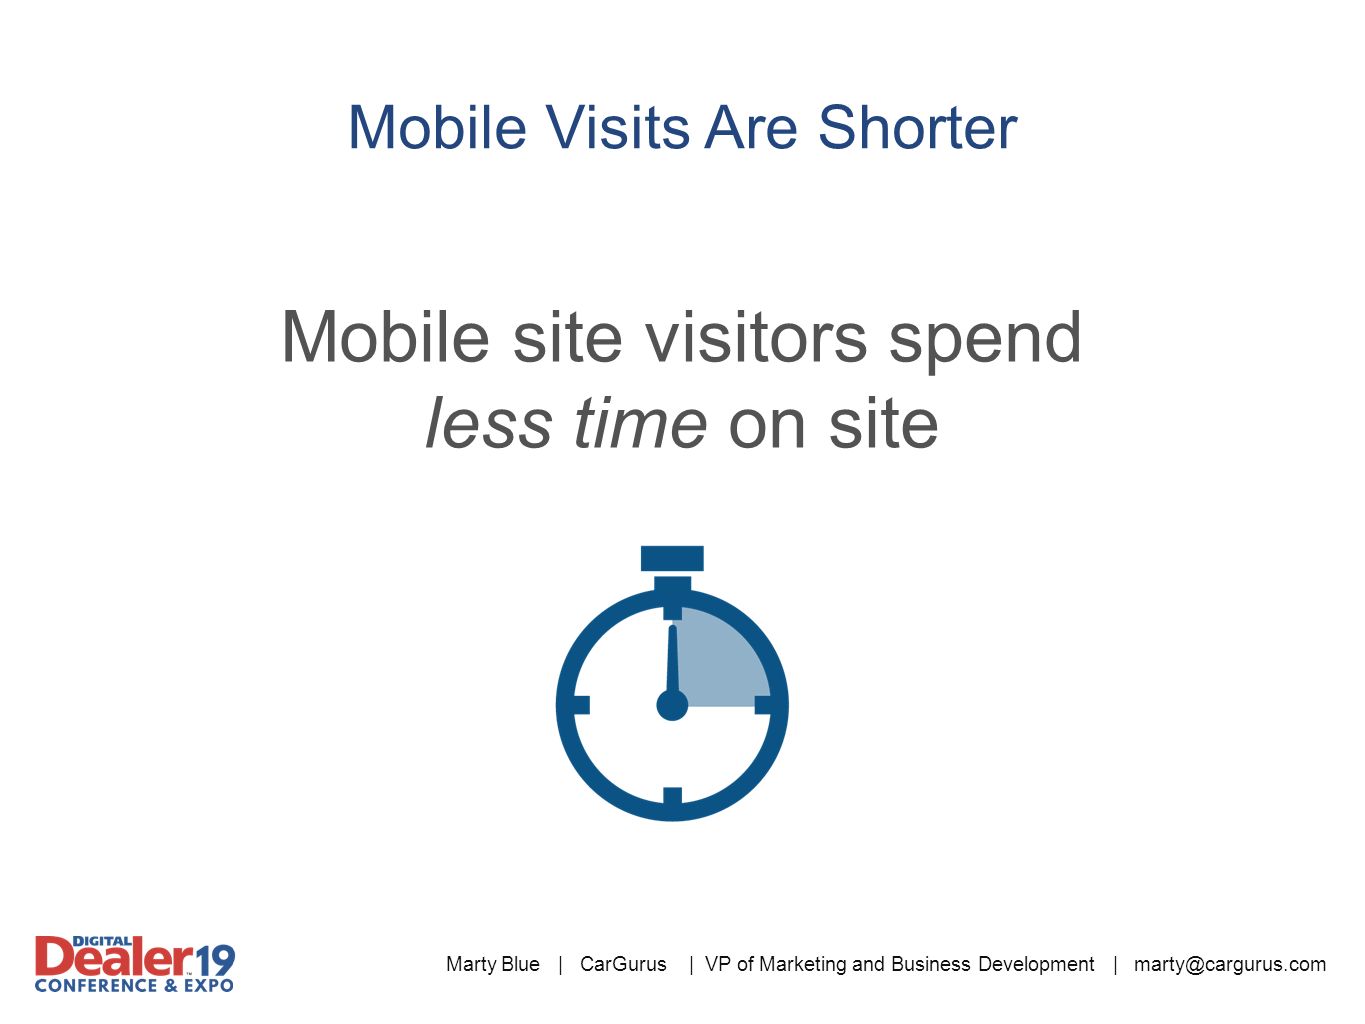 Marty Blue | CarGurus | VP of Marketing and Business Development | Mobile Visits Are Shorter Mobile site visitors spend less time on site